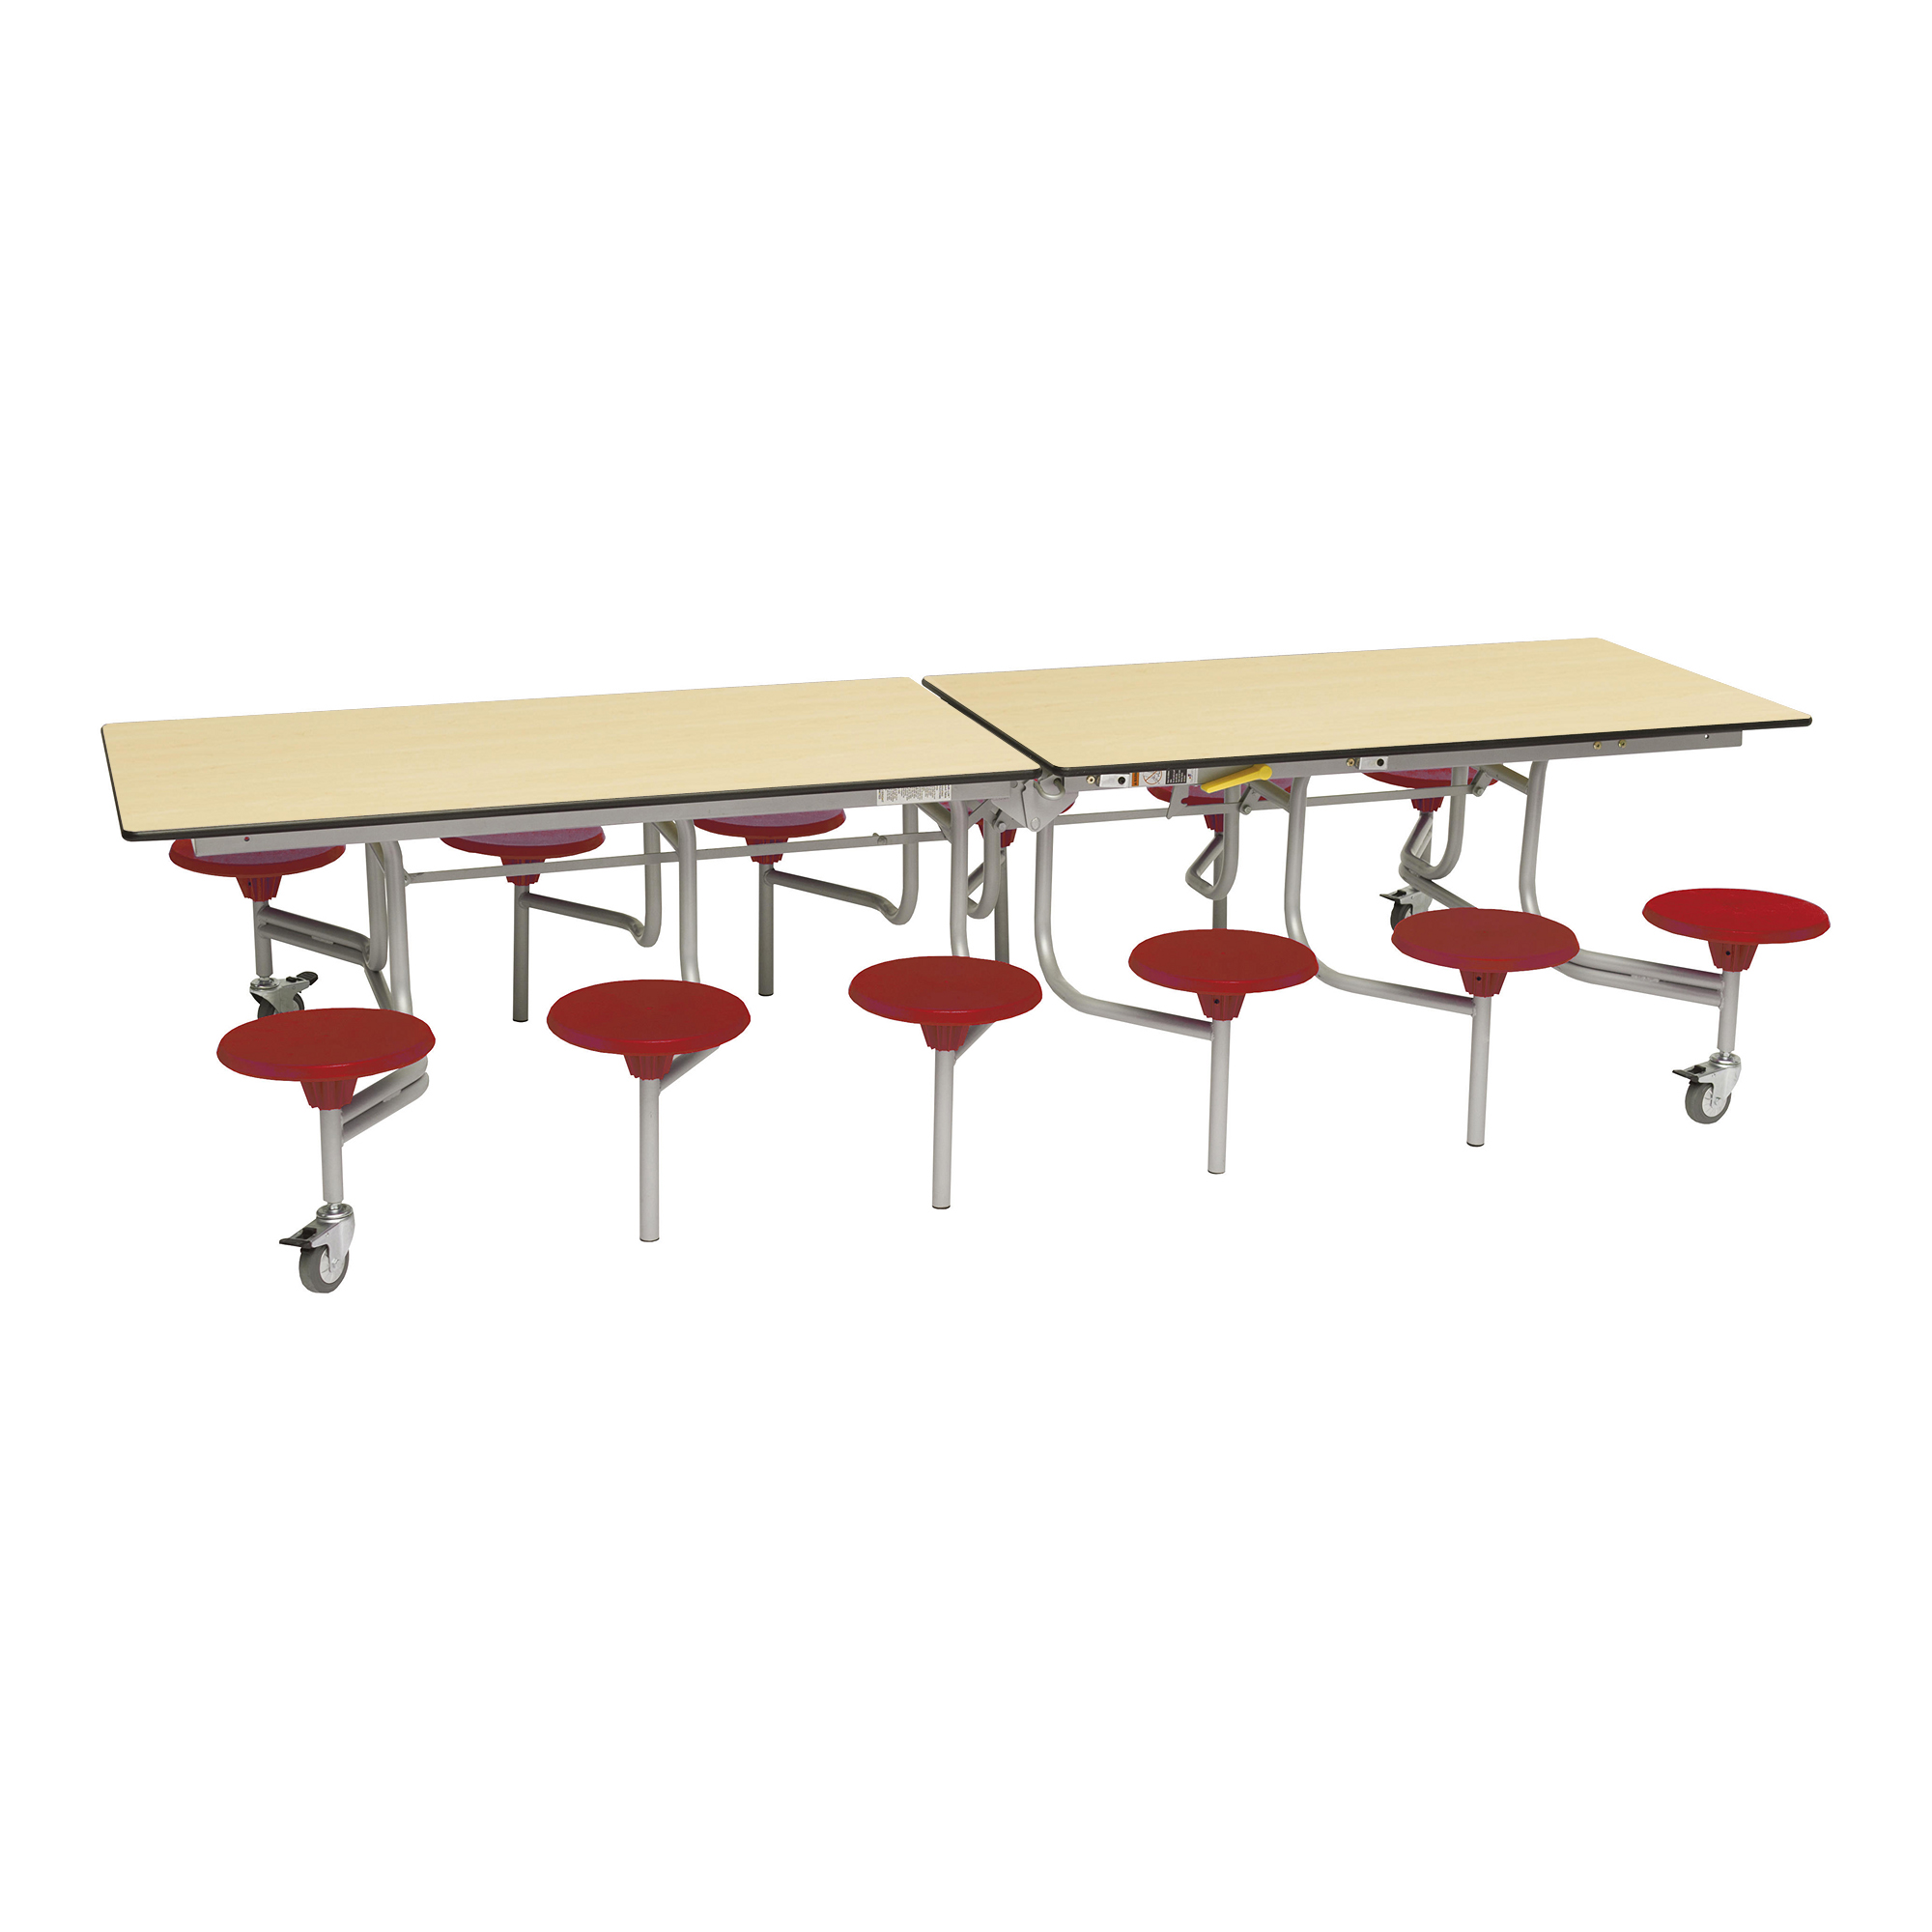 Sec 12 Seat Dining Table RedSeat MpleTop